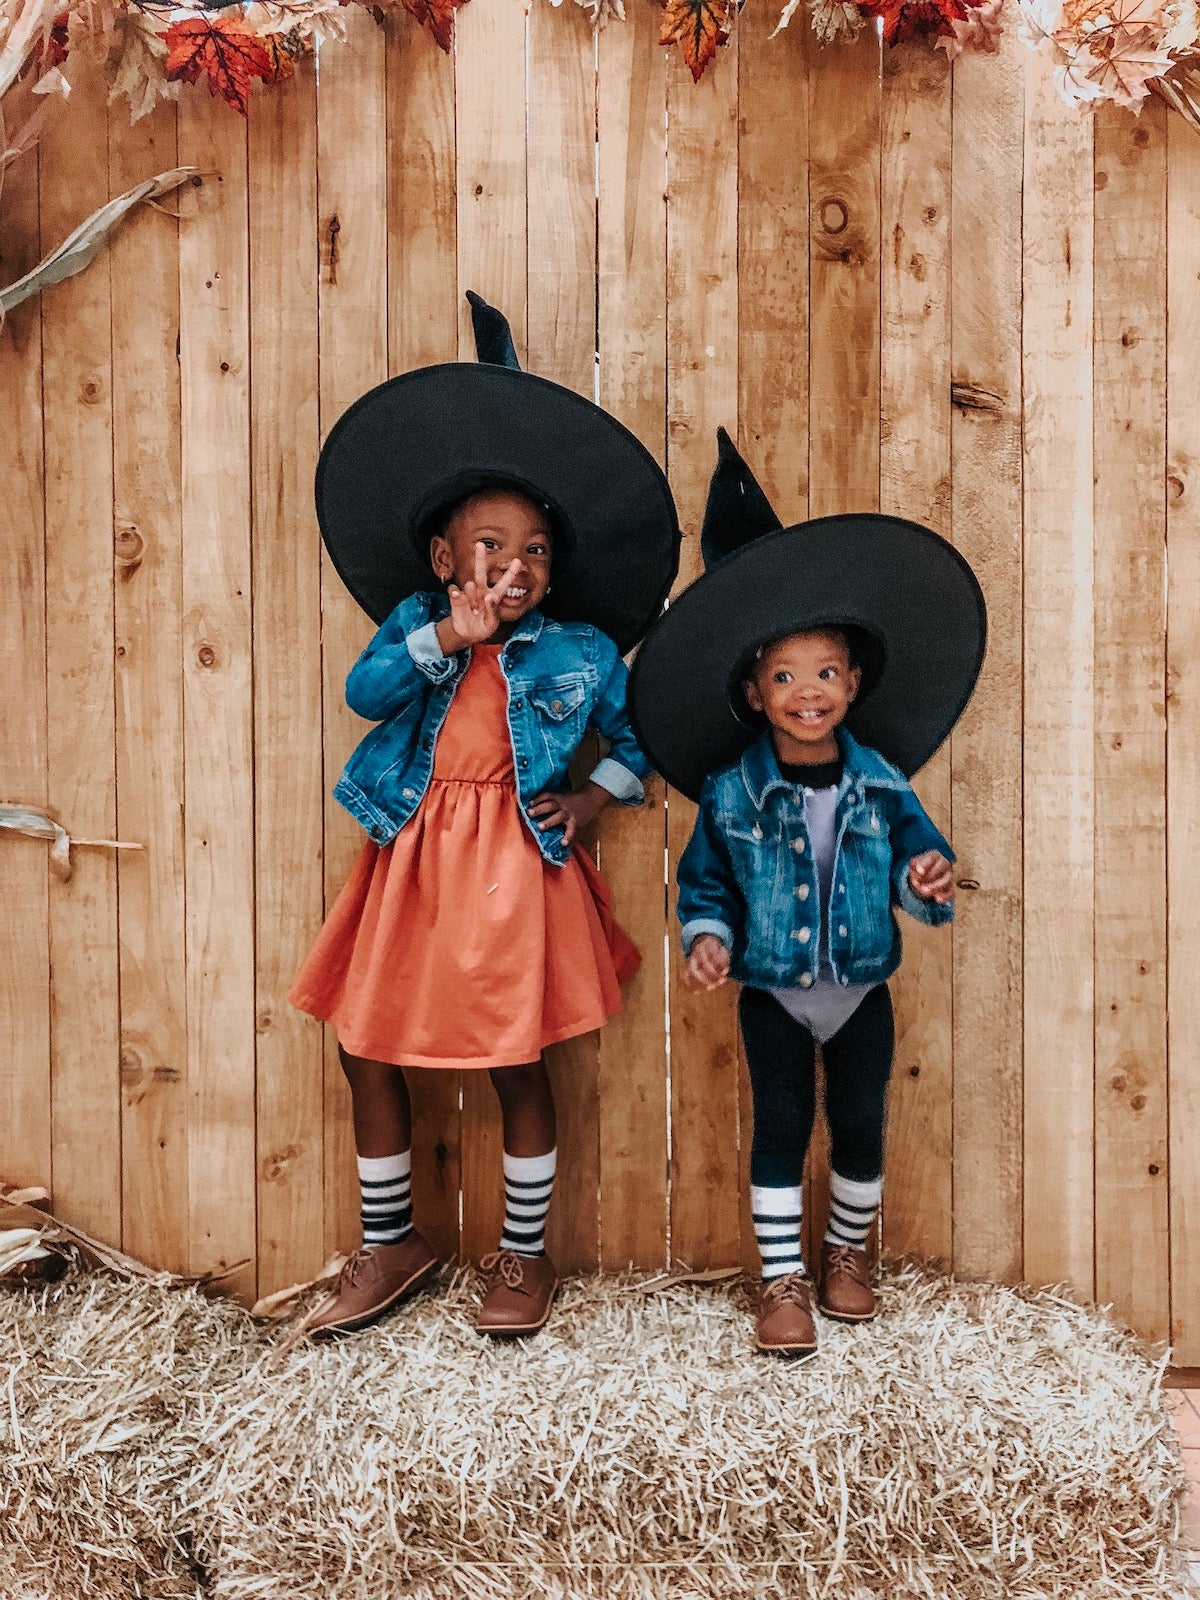 Photo of little girls in Halloween costumes posing for a photo in front of wooden fence